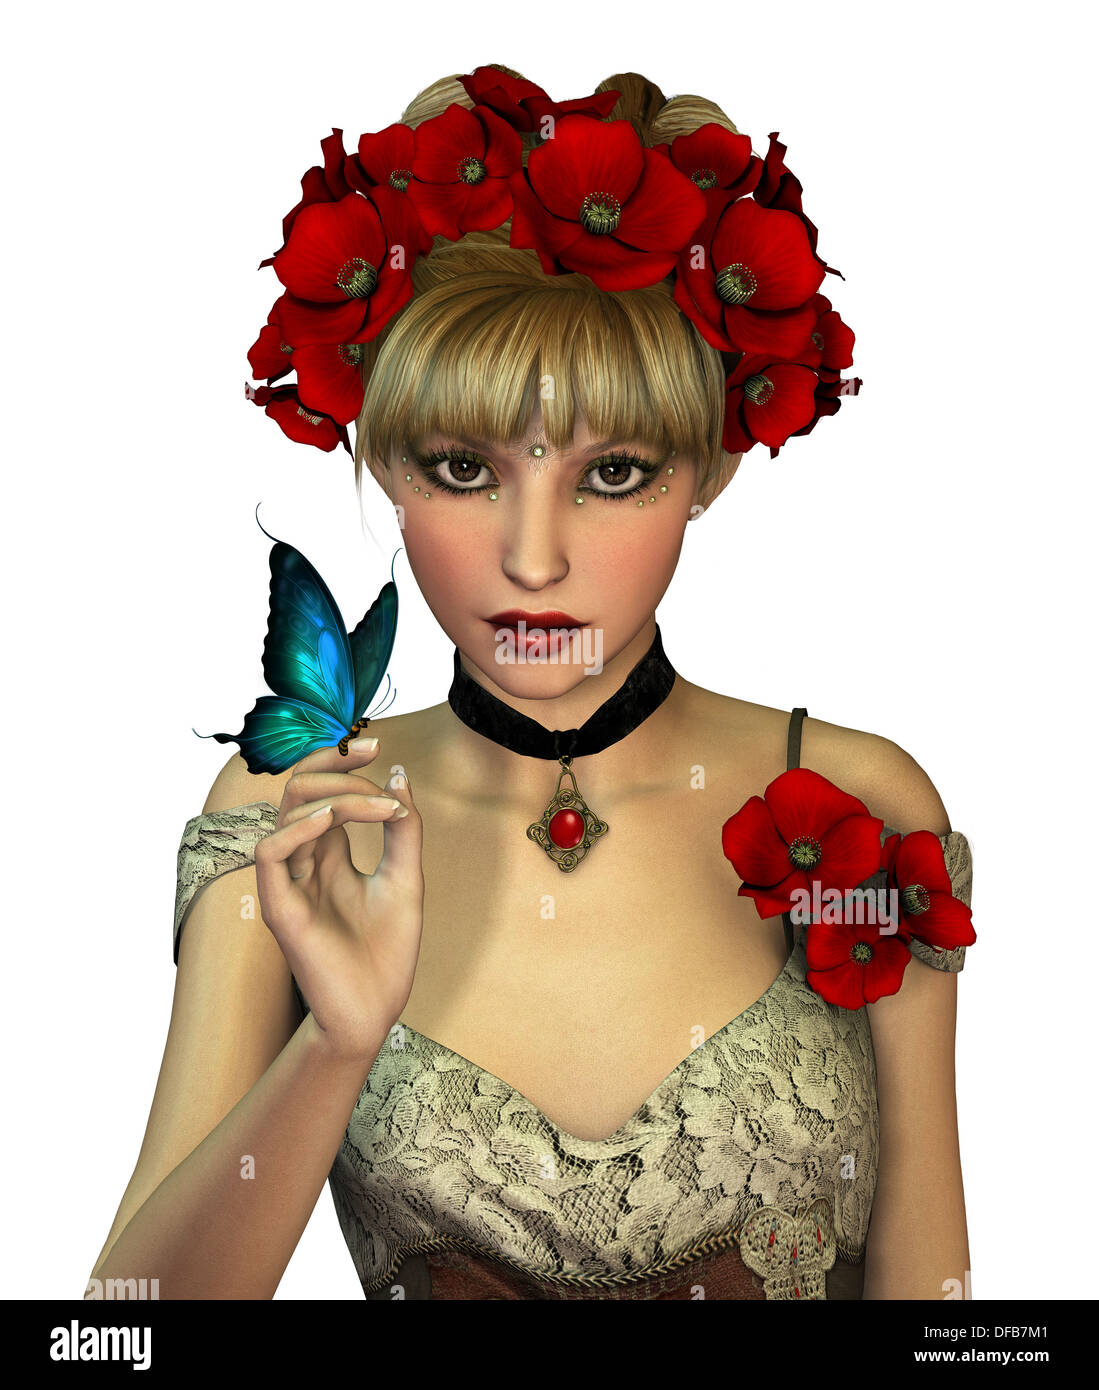 3d Computer Graphics of a Girl with red Poppies in her Hair Stock Photo